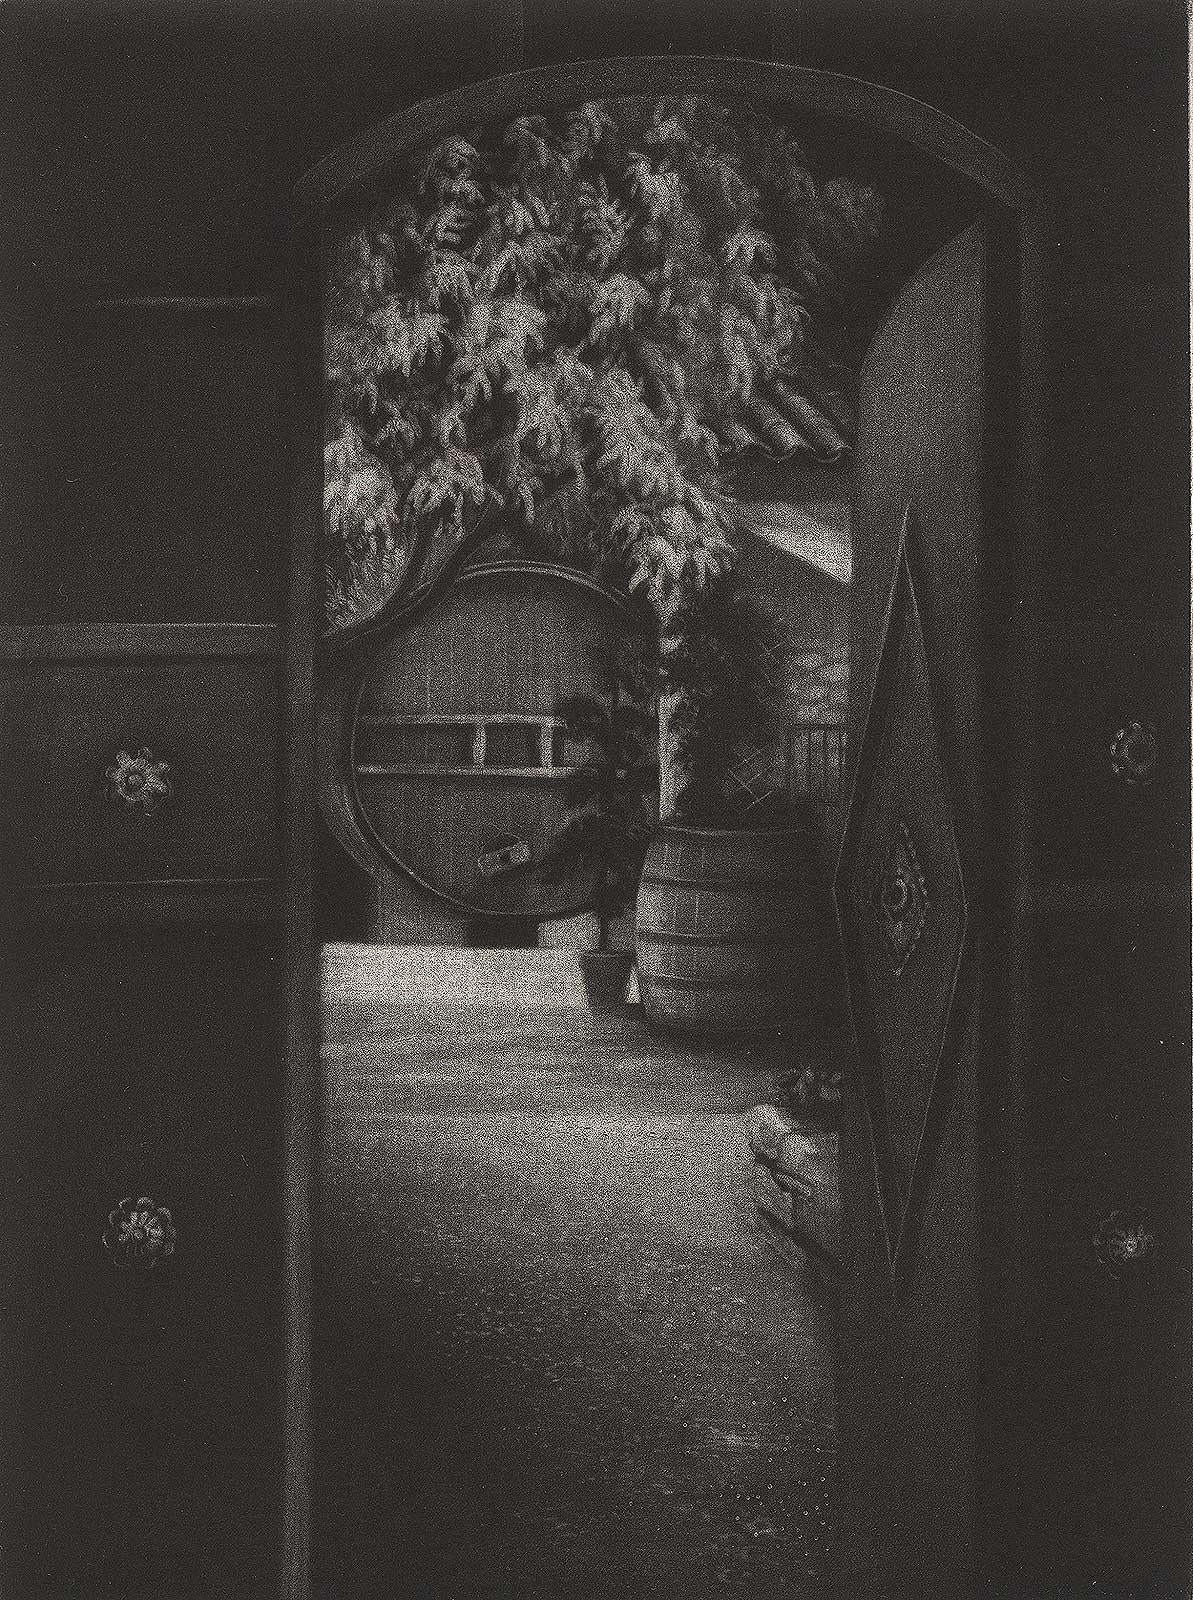 Judith Rothchild Interior Print - Le Seuil (The Threshold)